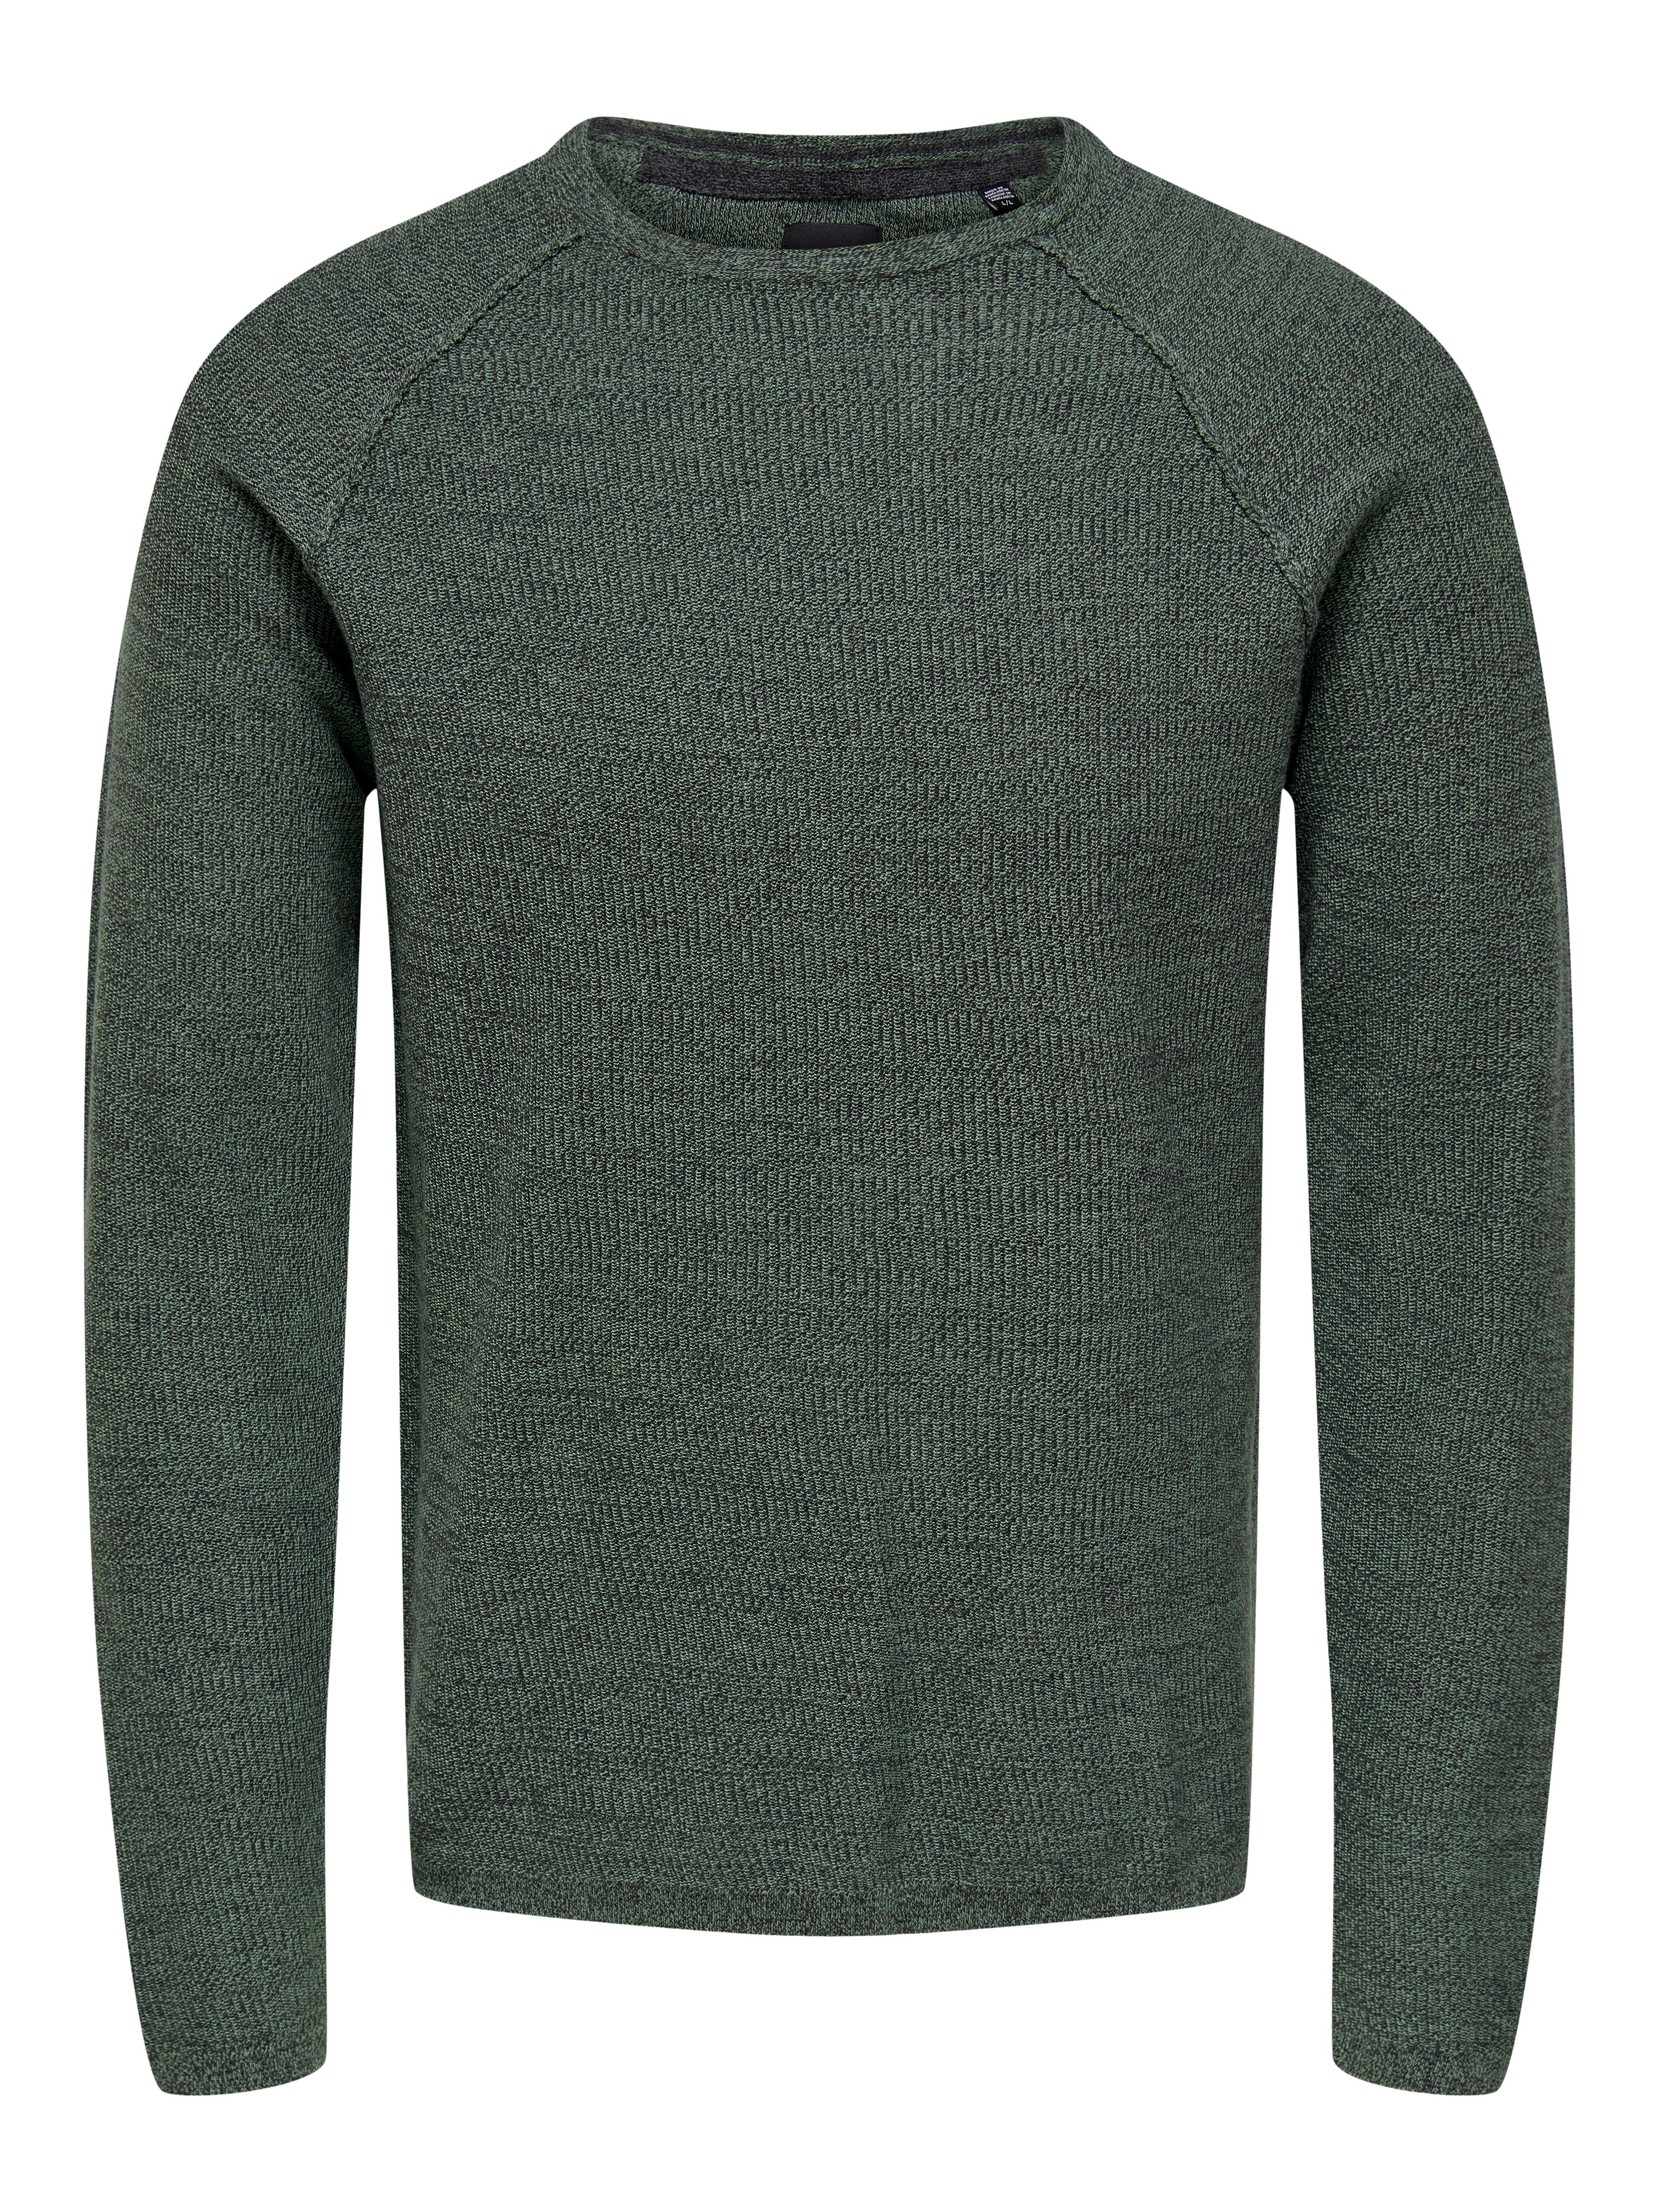 Wofupowga Mens Knits Crewneck Long Sleeve Spell Color Pullover Jumper Sweaters